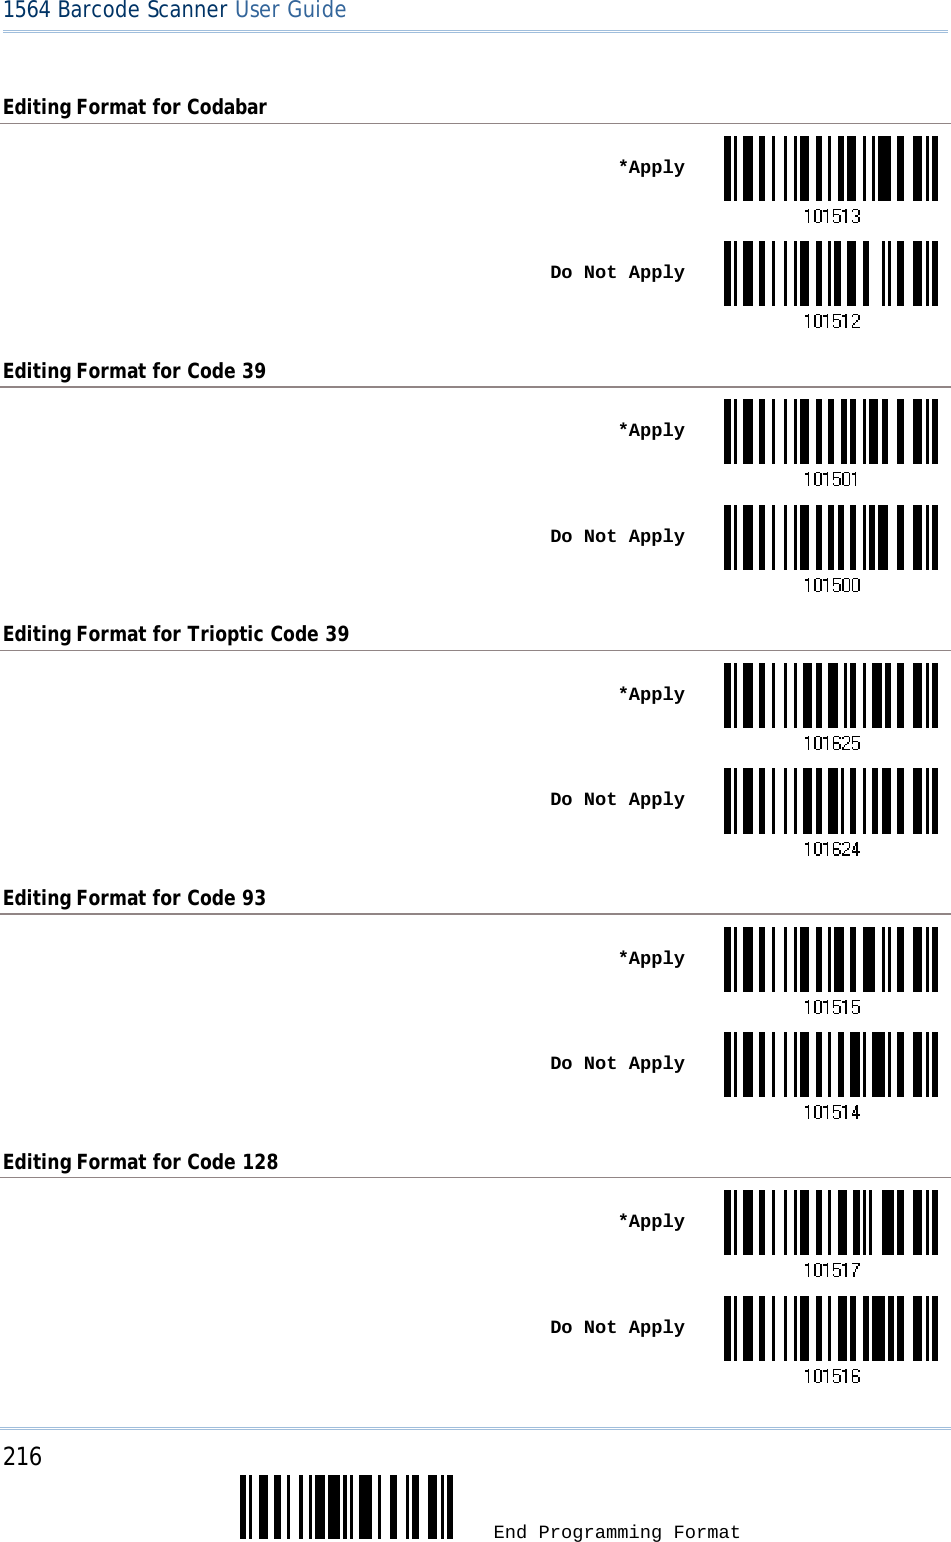 216  End Programming Format 1564 Barcode Scanner User Guide  Editing Format for Codabar  *Apply Do Not ApplyEditing Format for Code 39  *Apply Do Not ApplyEditing Format for Trioptic Code 39  *Apply Do Not ApplyEditing Format for Code 93  *Apply Do Not ApplyEditing Format for Code 128  *Apply Do Not Apply